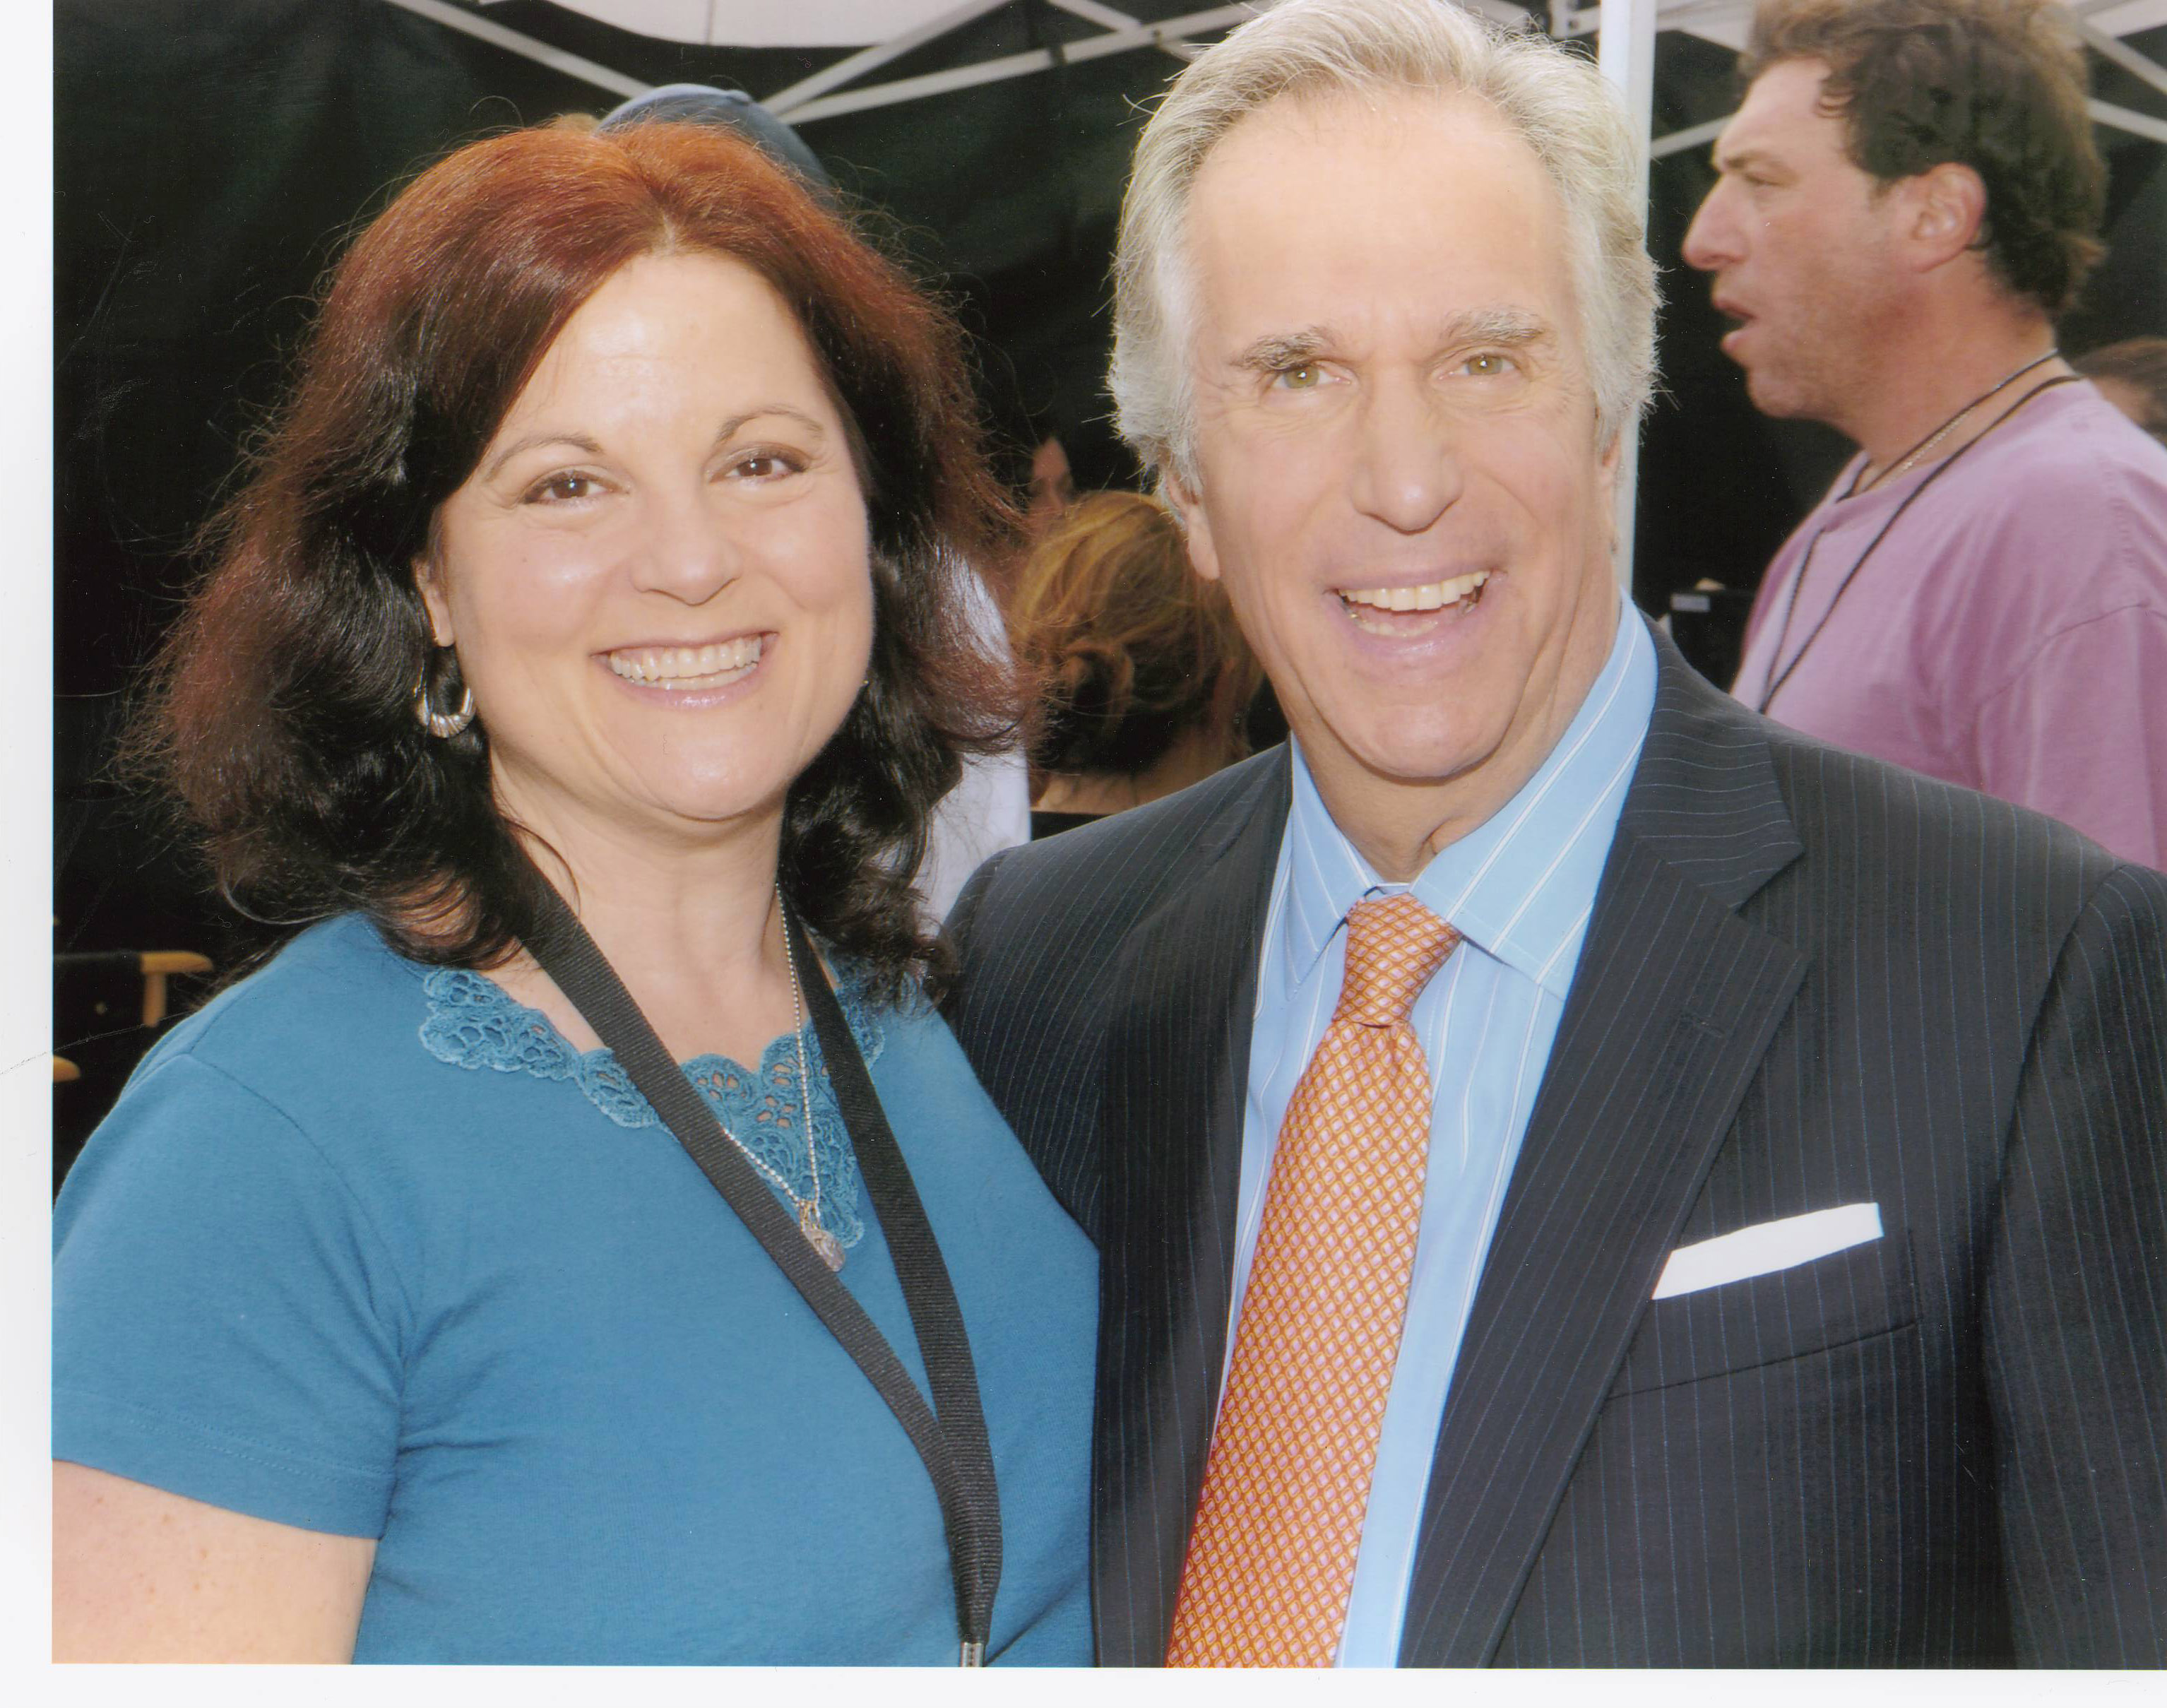 Debra Markowitz and Henry Winkler on the set of Royal Pains